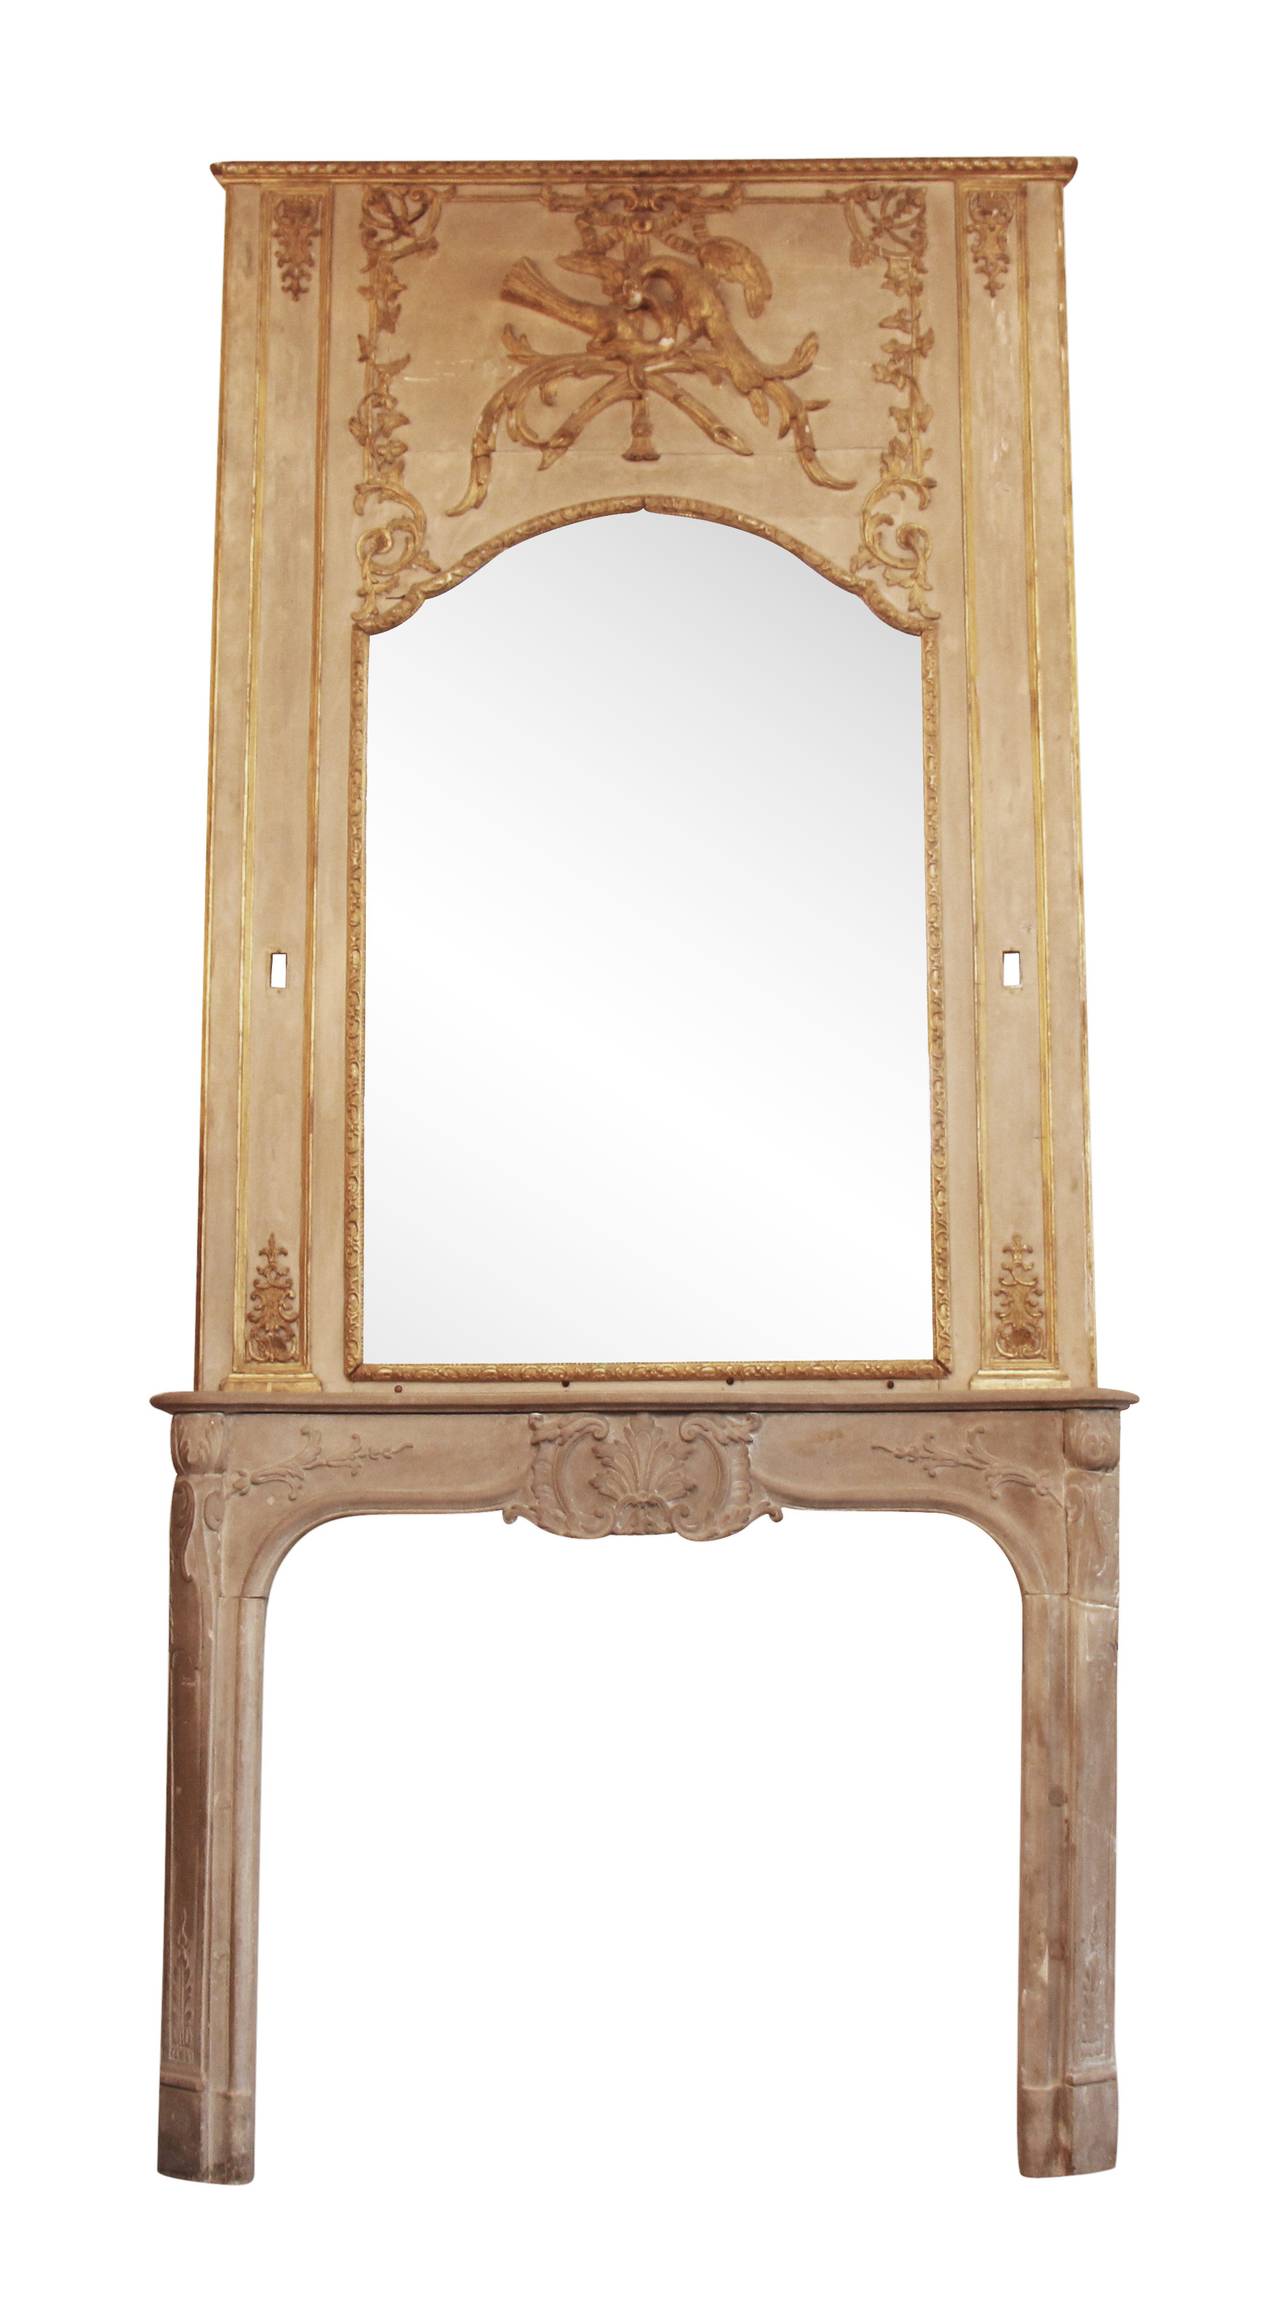 Limestone mantel with large ornate overmantel mirror, salvaged from a penthouse at 1107 5th Ave. overlooking the reservoir in Central Park. Original finishes. This item can be viewed at our 302 Bowery location in Manhattan.